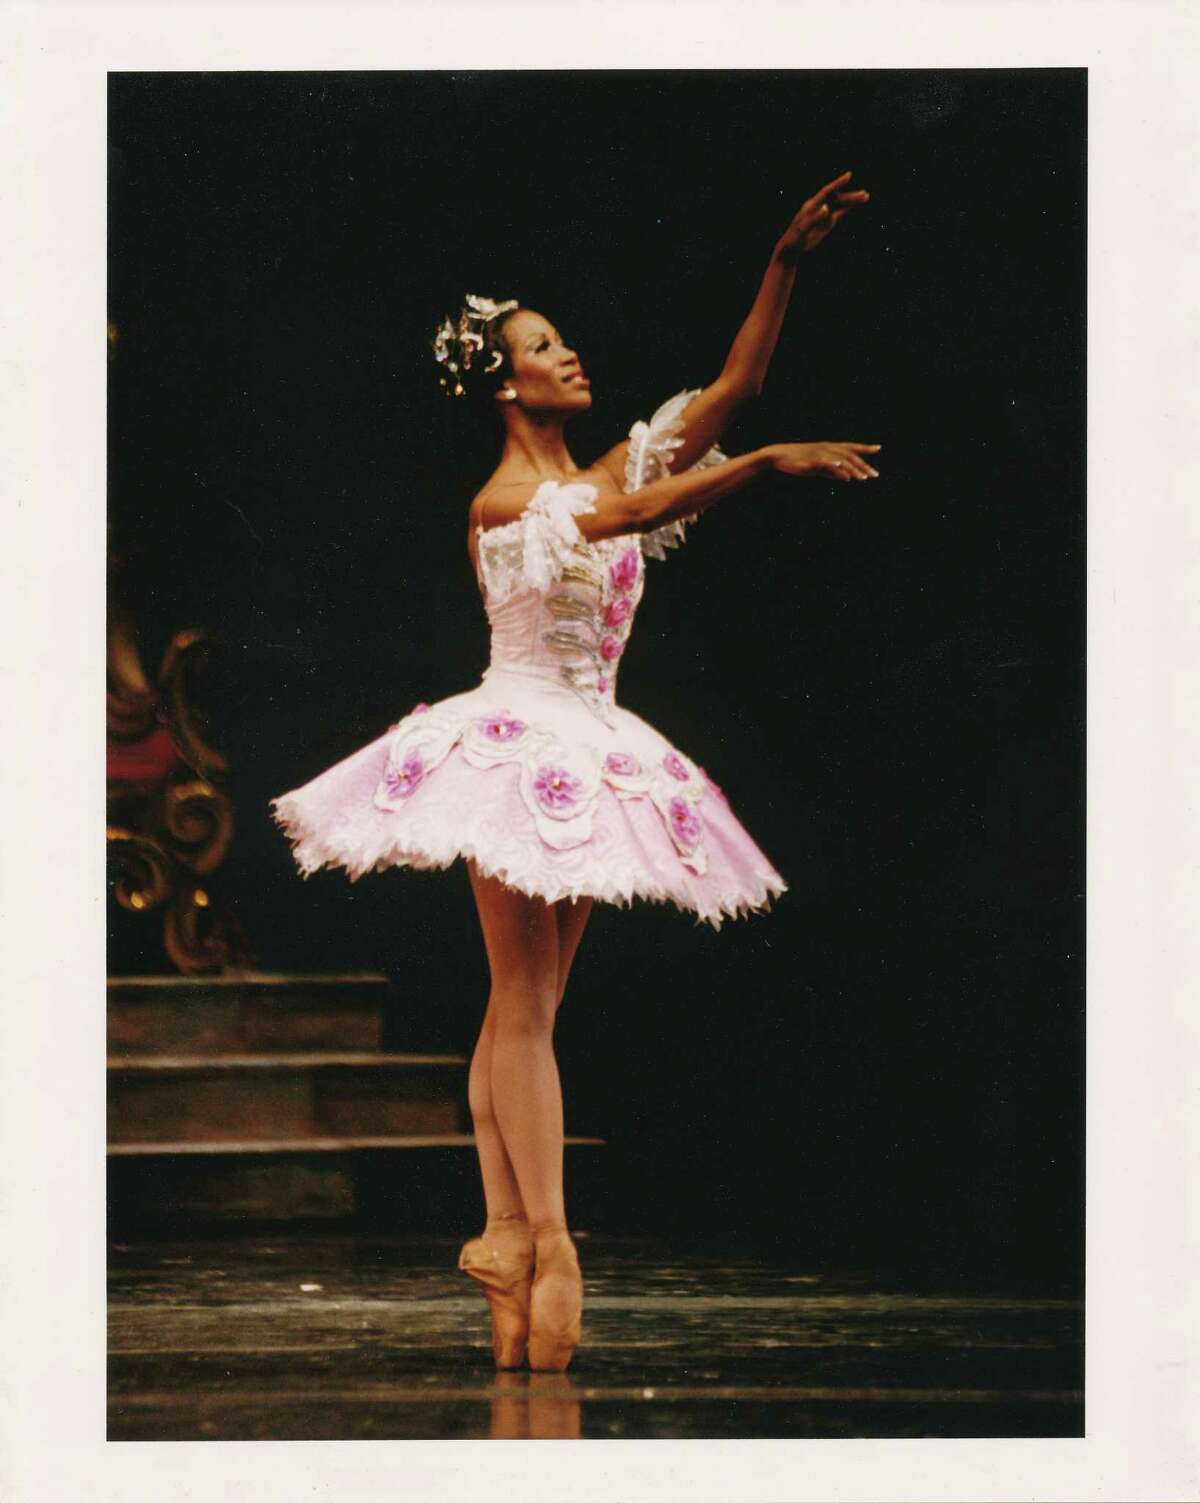 Lauren Anderson performed the role of the Sugar Plum Fairy in Ben Stevenson's production of "The Nutcracker" for Houston Ballet for many years.